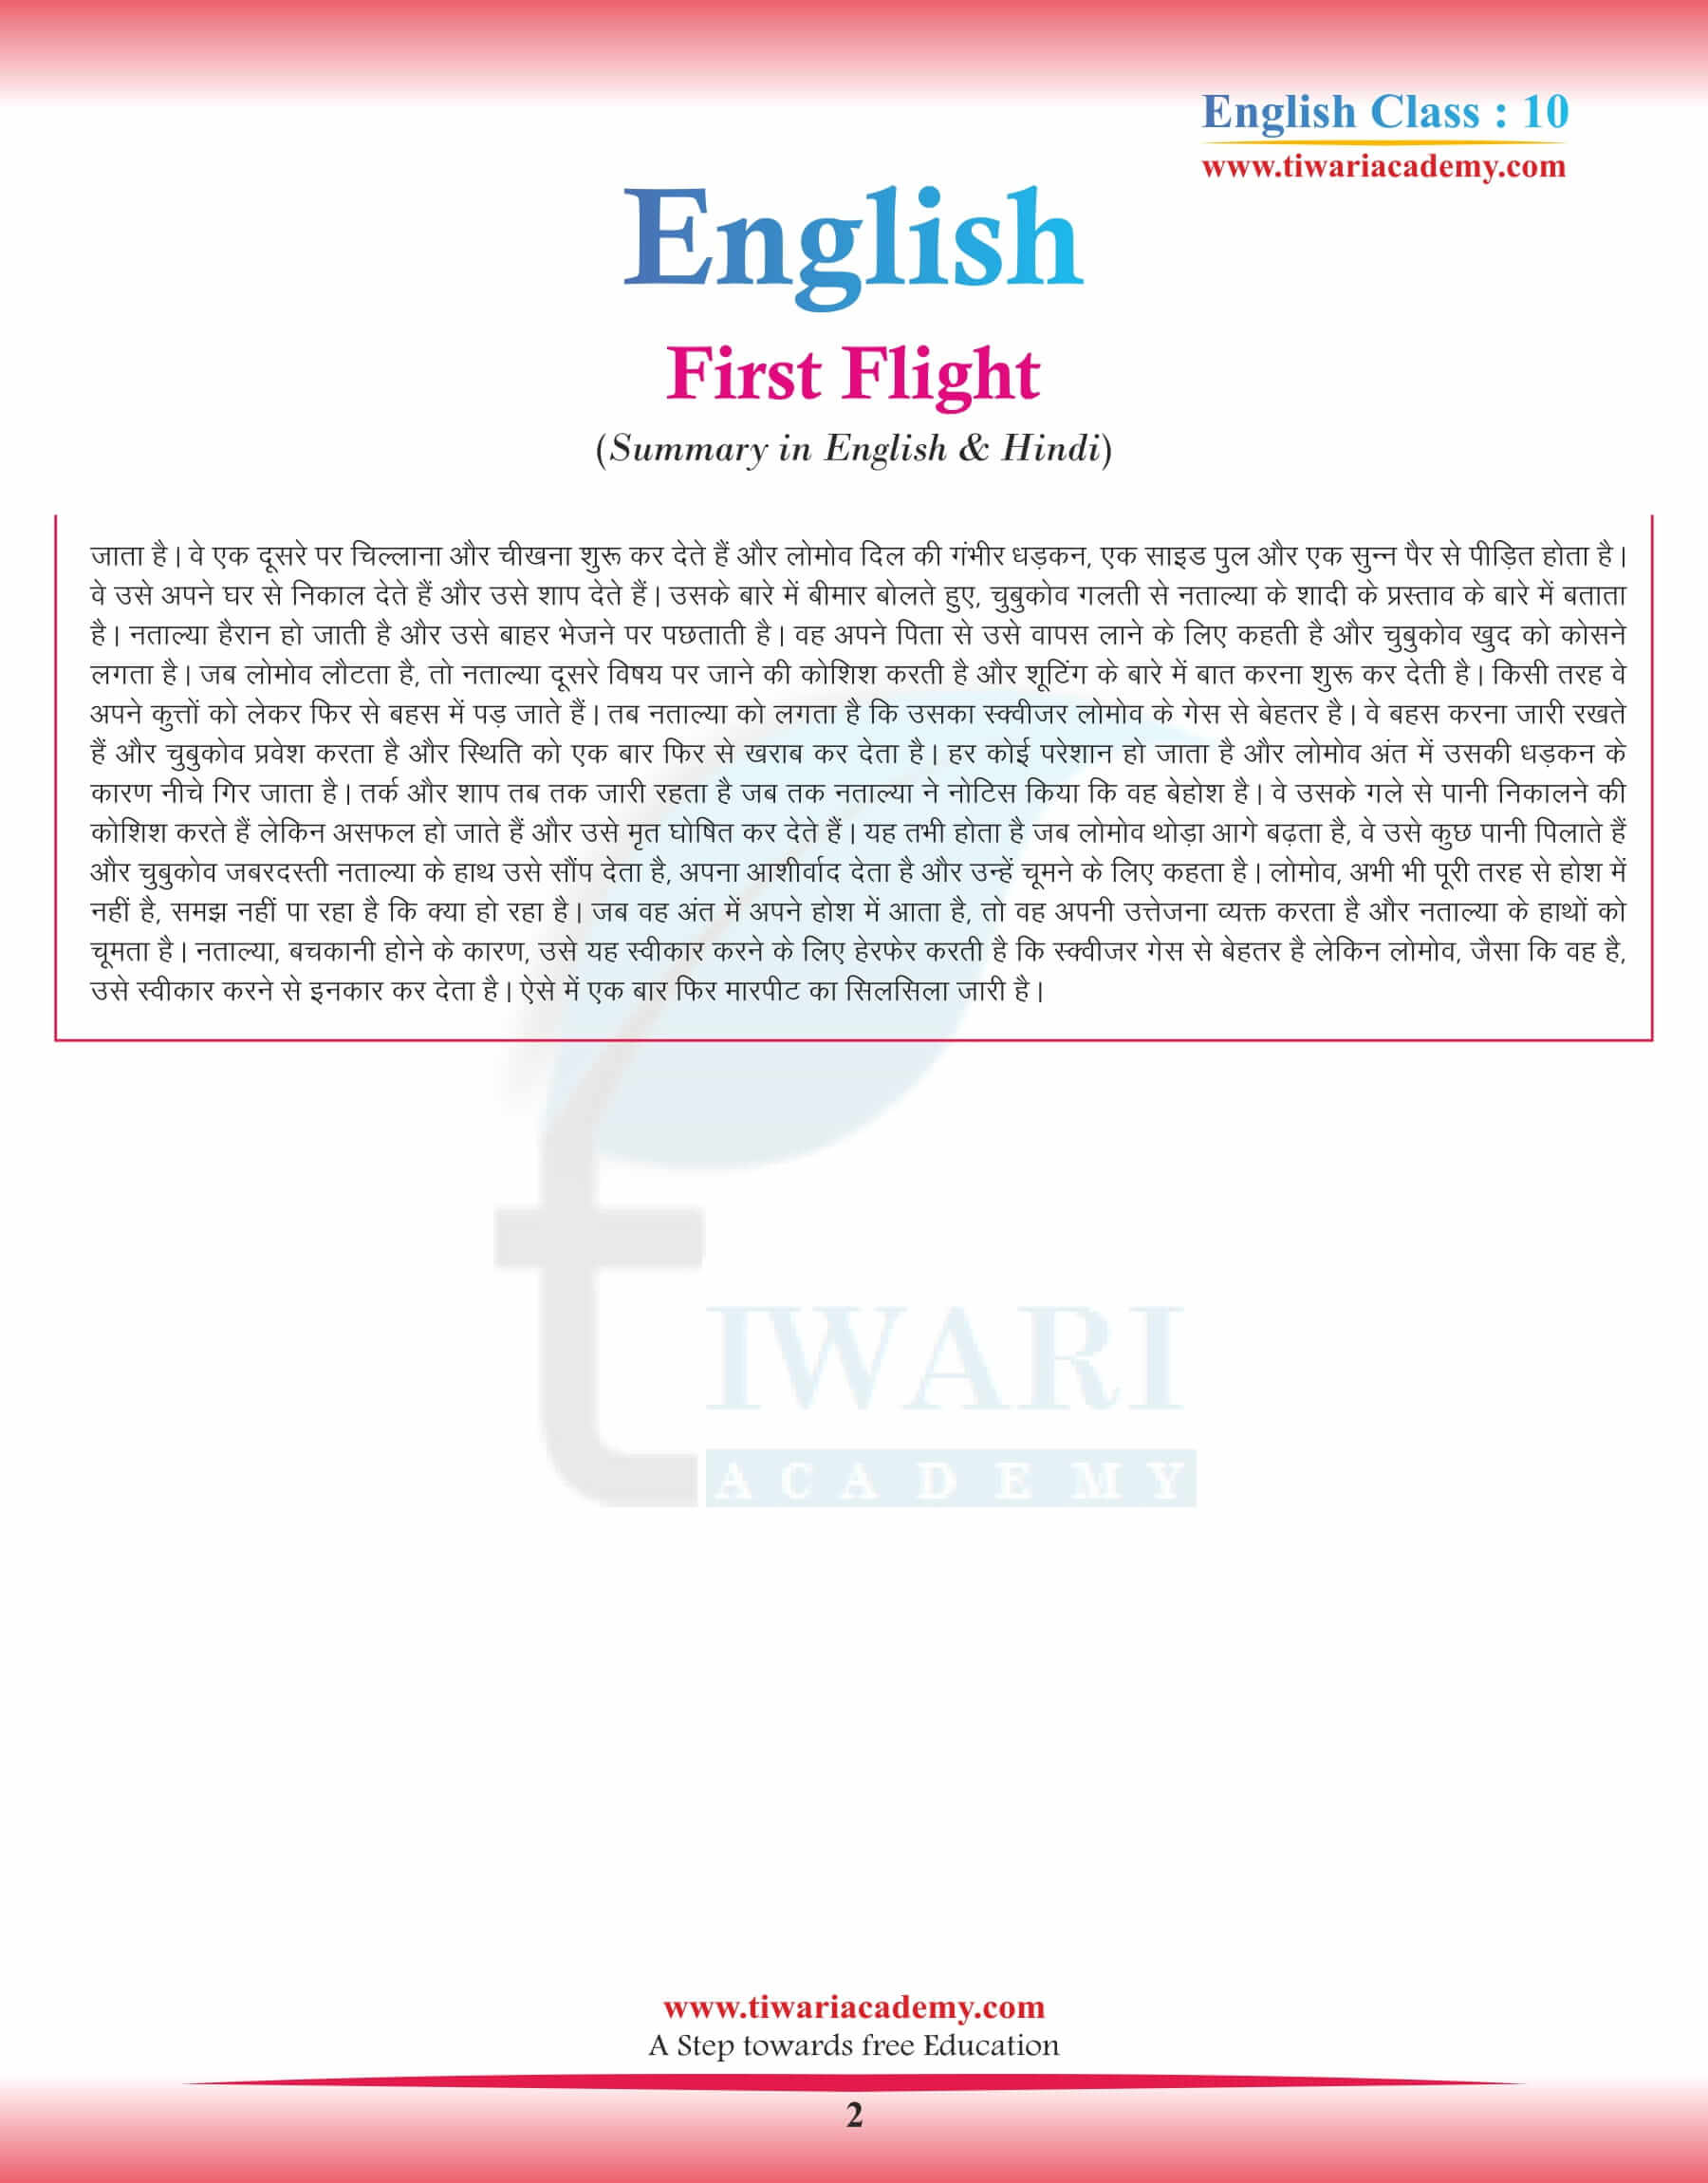 Class 10 English Chapter 11 Summary in Hindi and English